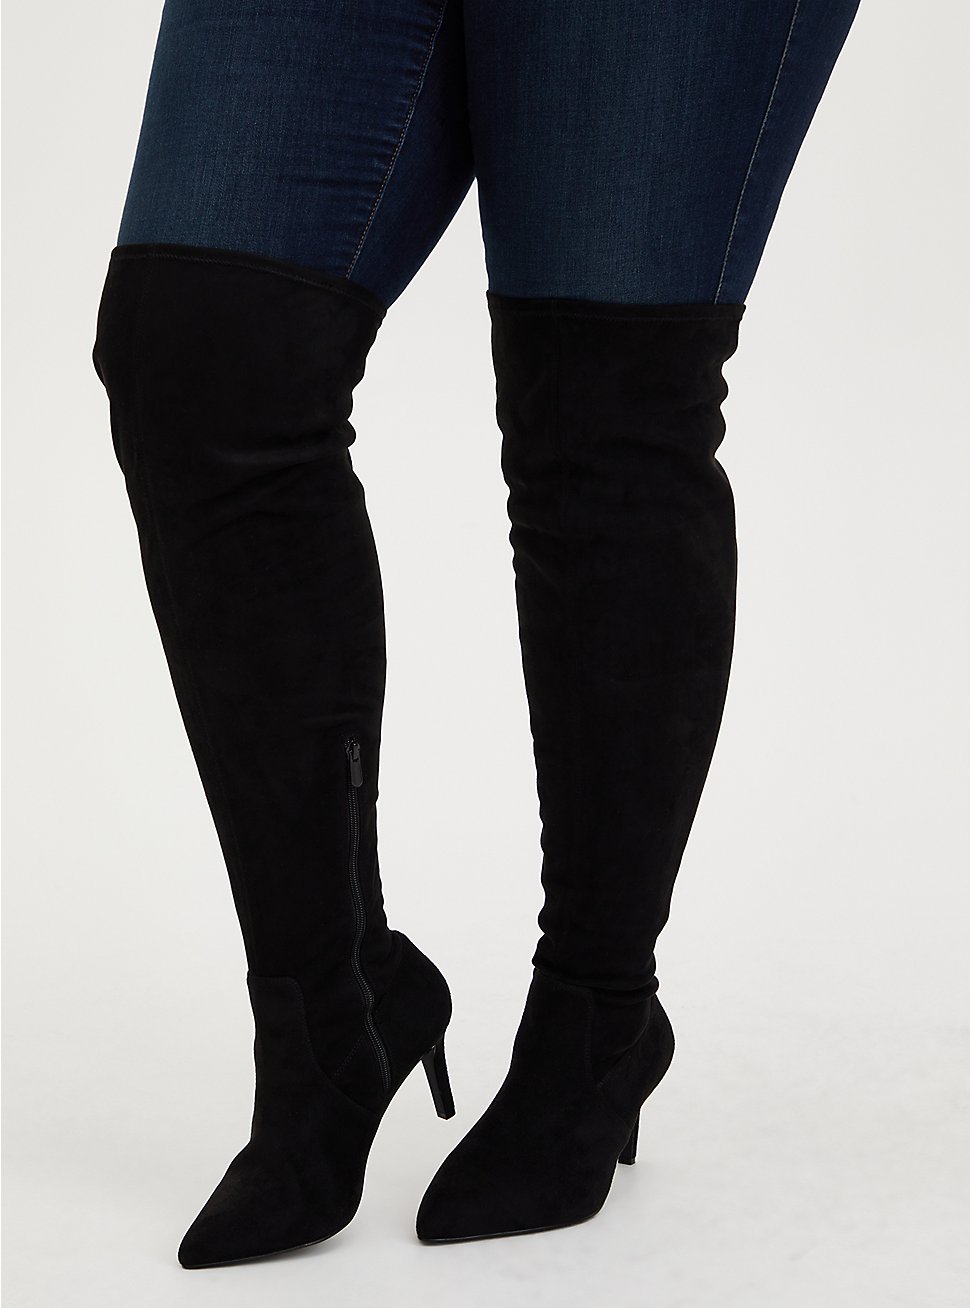 Plus Size Black Faux Suede Over-The-Knee Heel Boot (WW), BLACK, hi-res